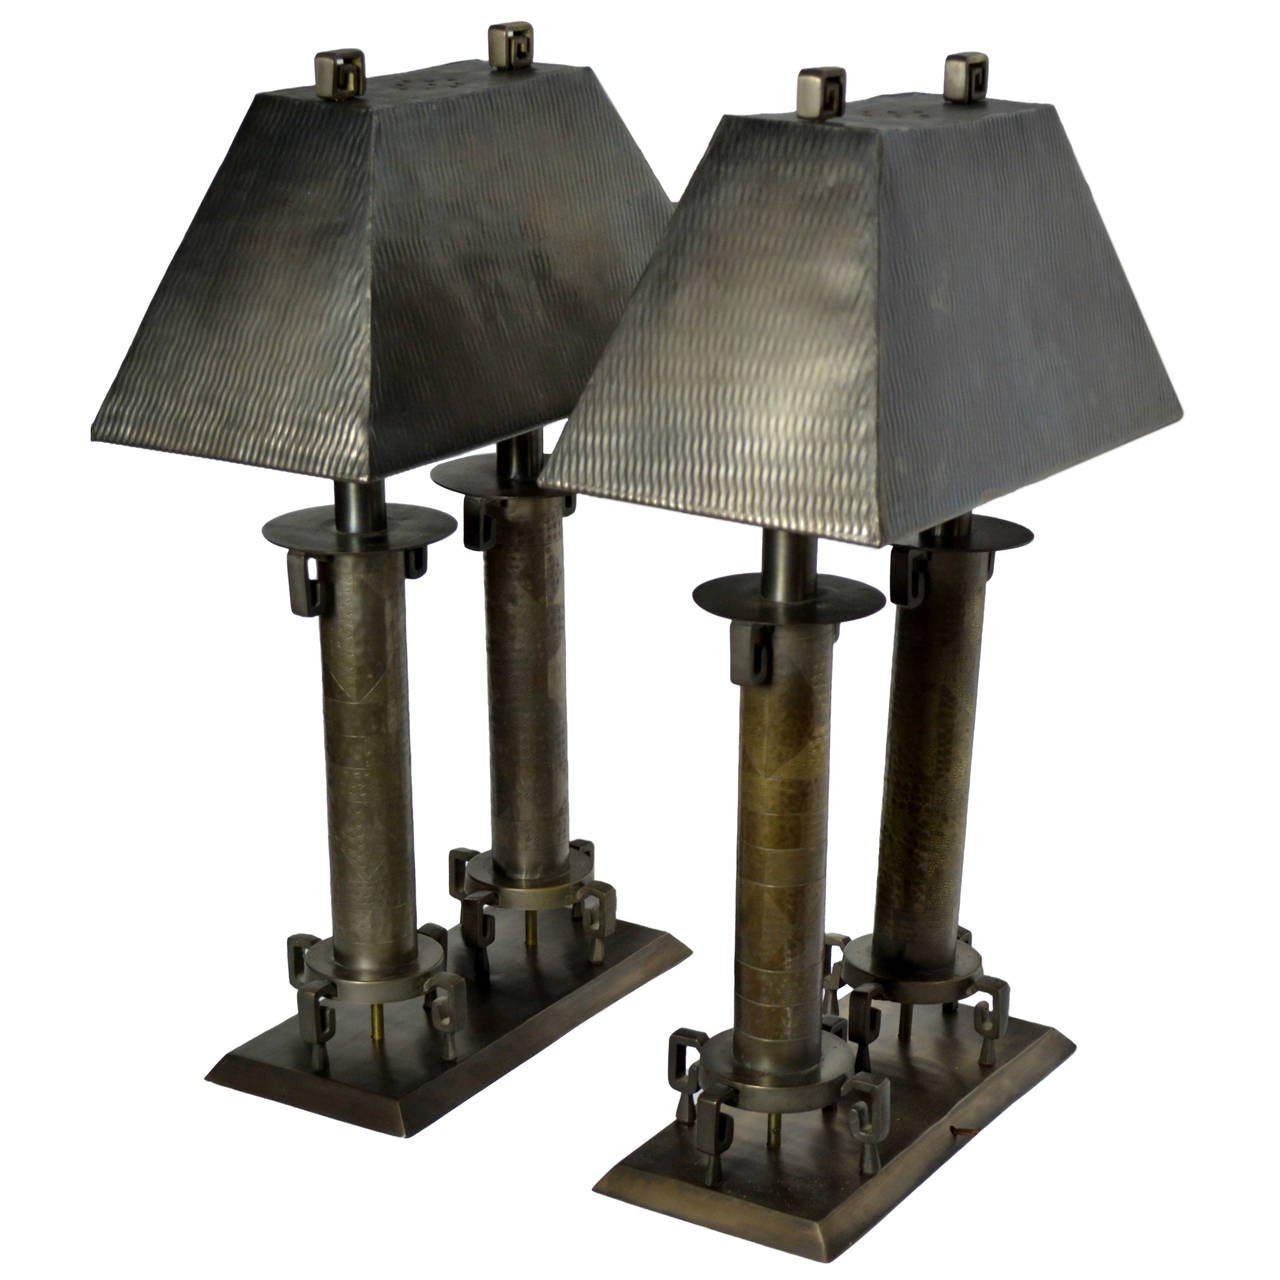 An unusual monumental pair of cast bronze table lamps from the Los Altos Golf and Country Club.
The club as built in 1923 and has had a number of renovations over its 80+ year existence.
According to members of the club's staff the lamps were